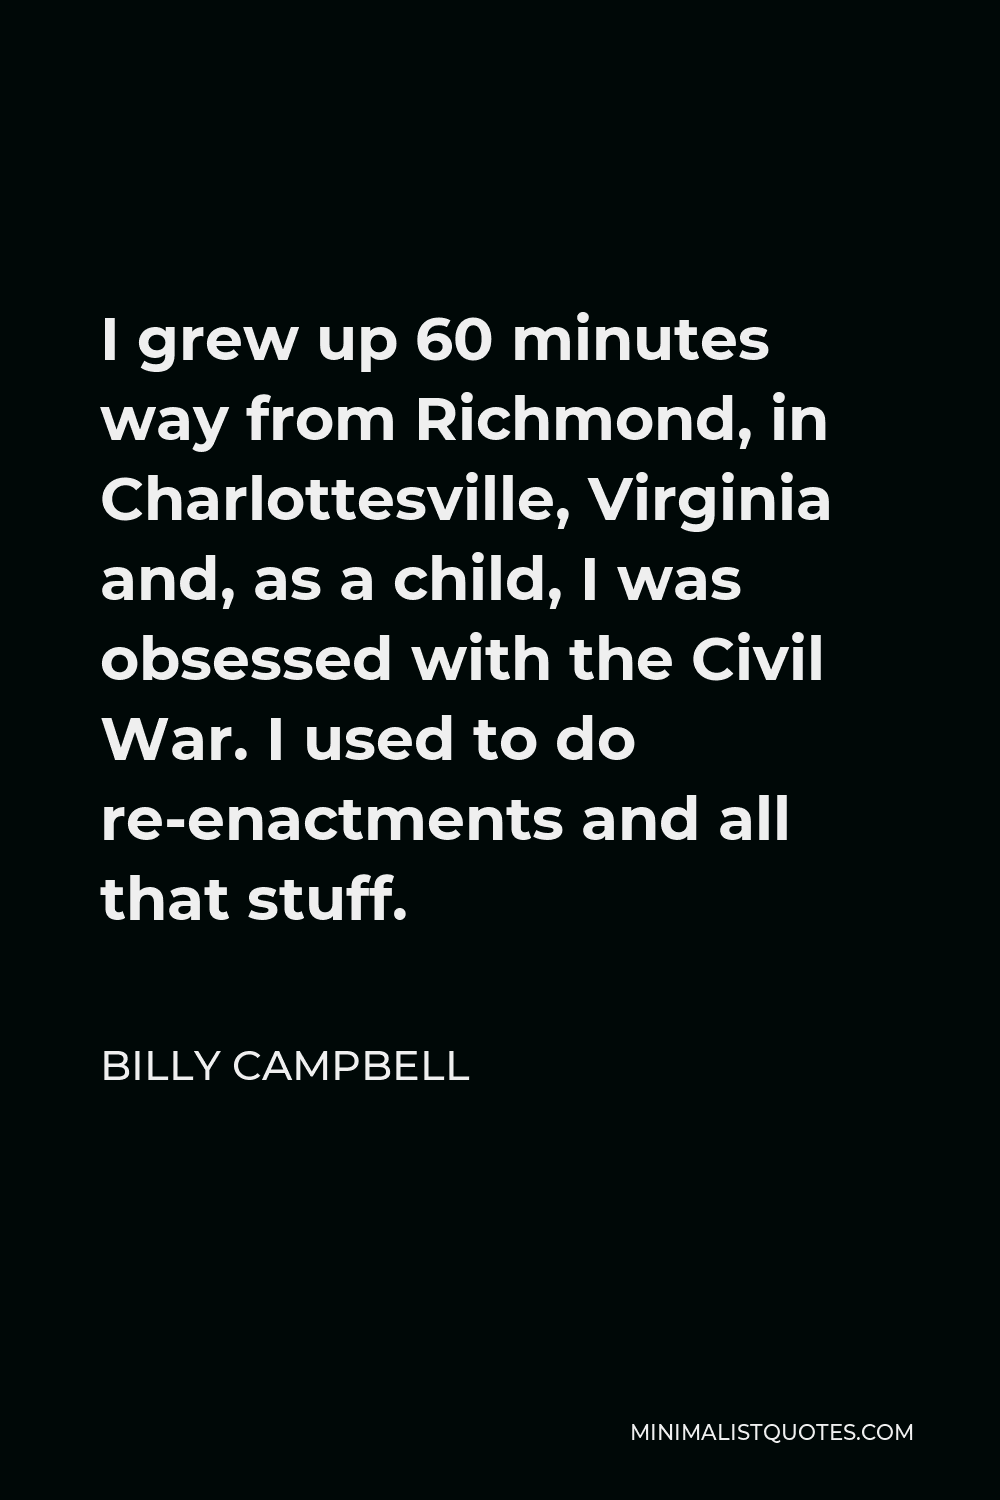 Billy Campbell Quote - I grew up 60 minutes way from Richmond, in Charlottesville, Virginia and, as a child, I was obsessed with the Civil War. I used to do re-enactments and all that stuff.